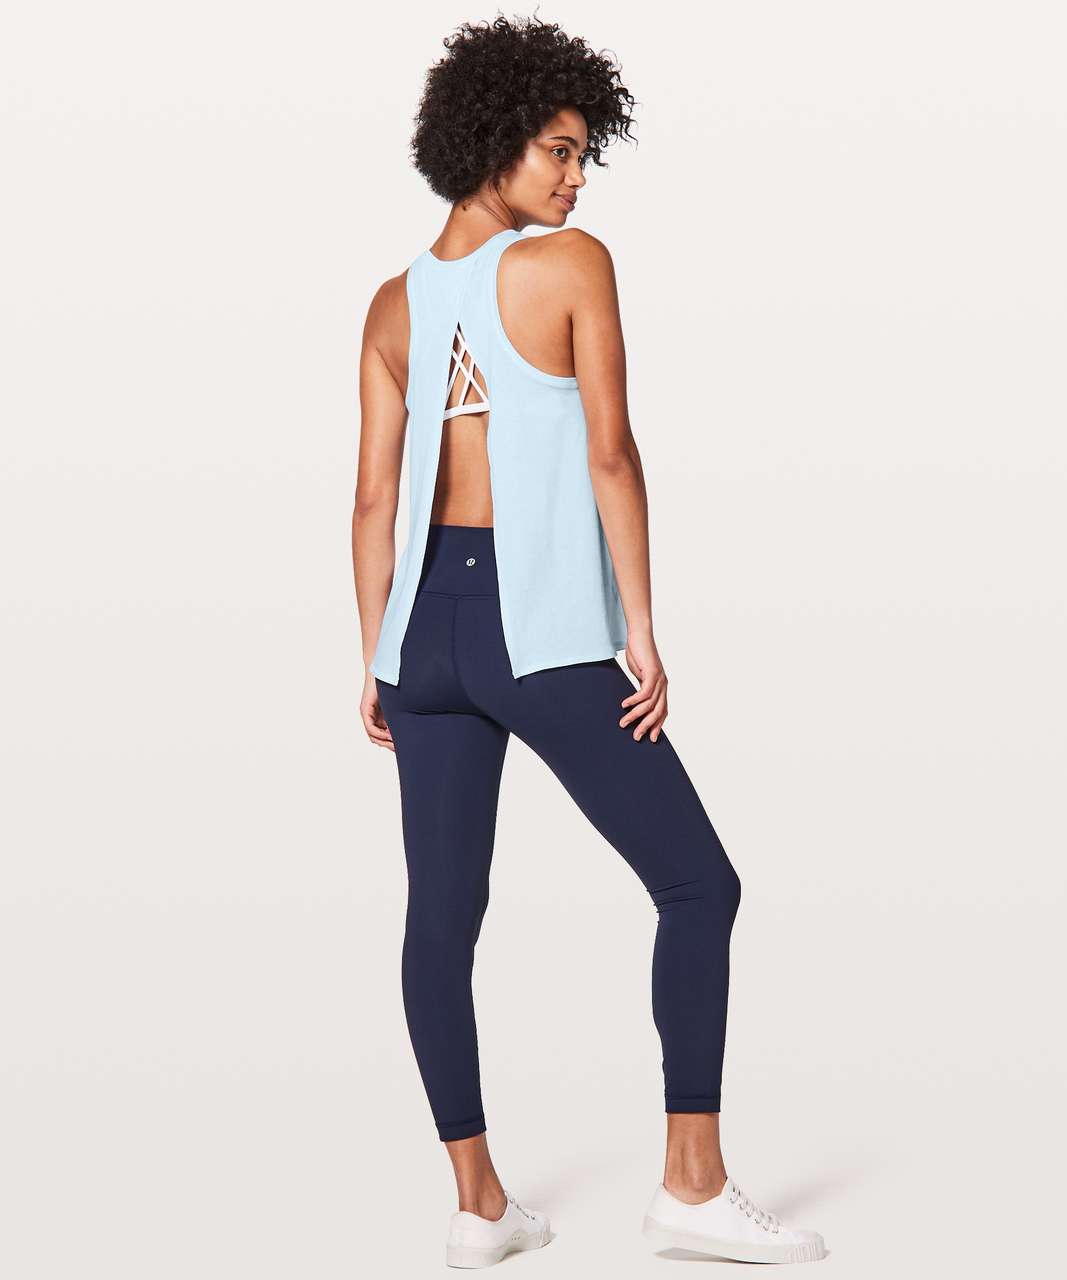 Lululemon All Tied Up Tank *Expression - Breezy